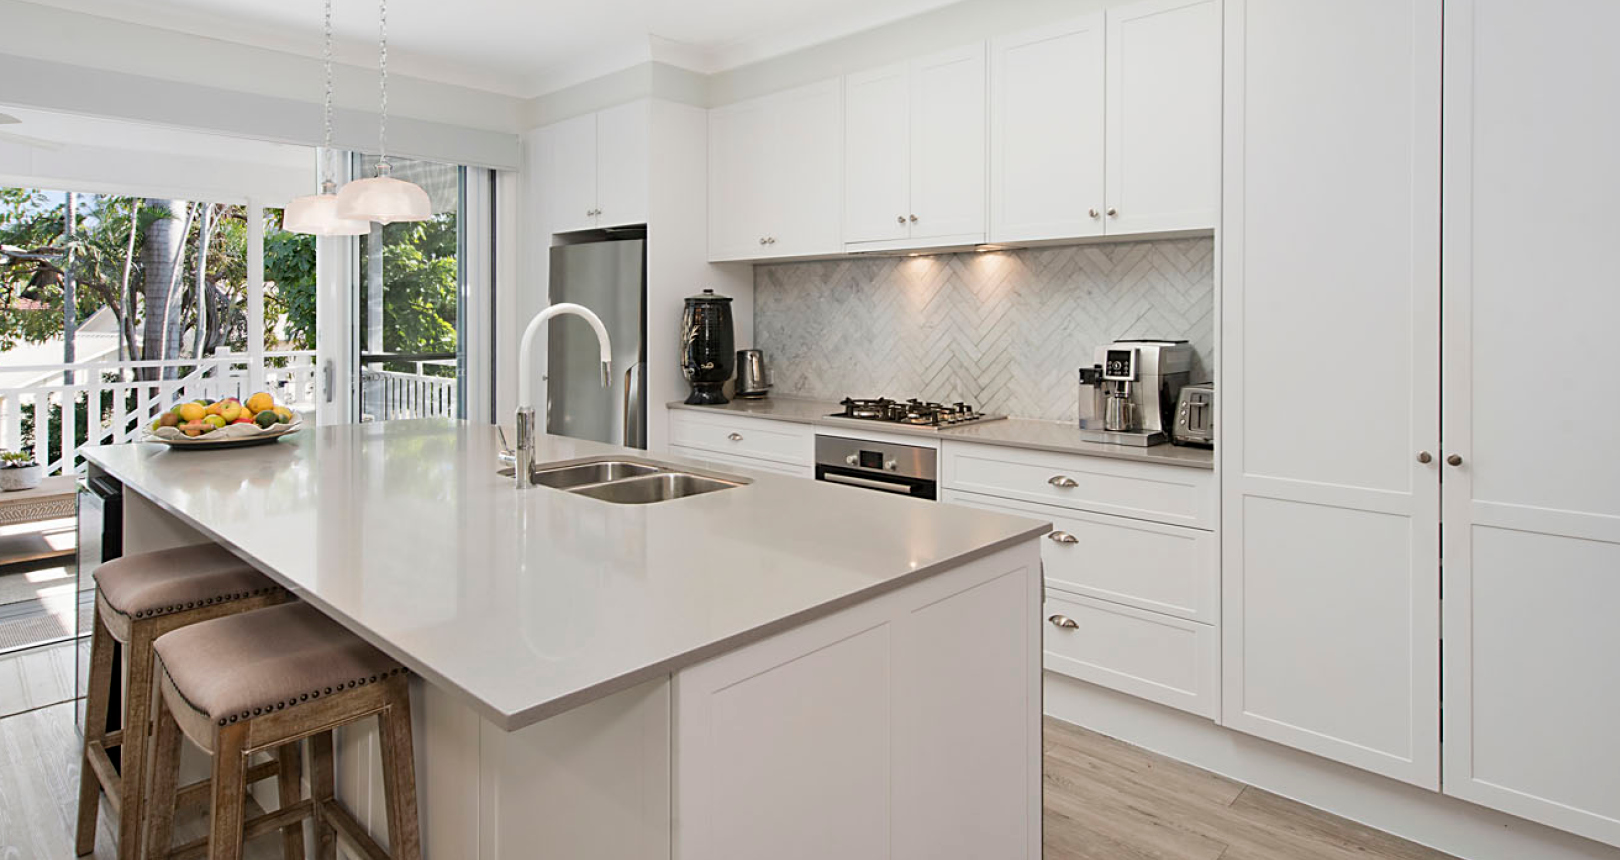 Add value to your kitchen - Toowong real estate tips